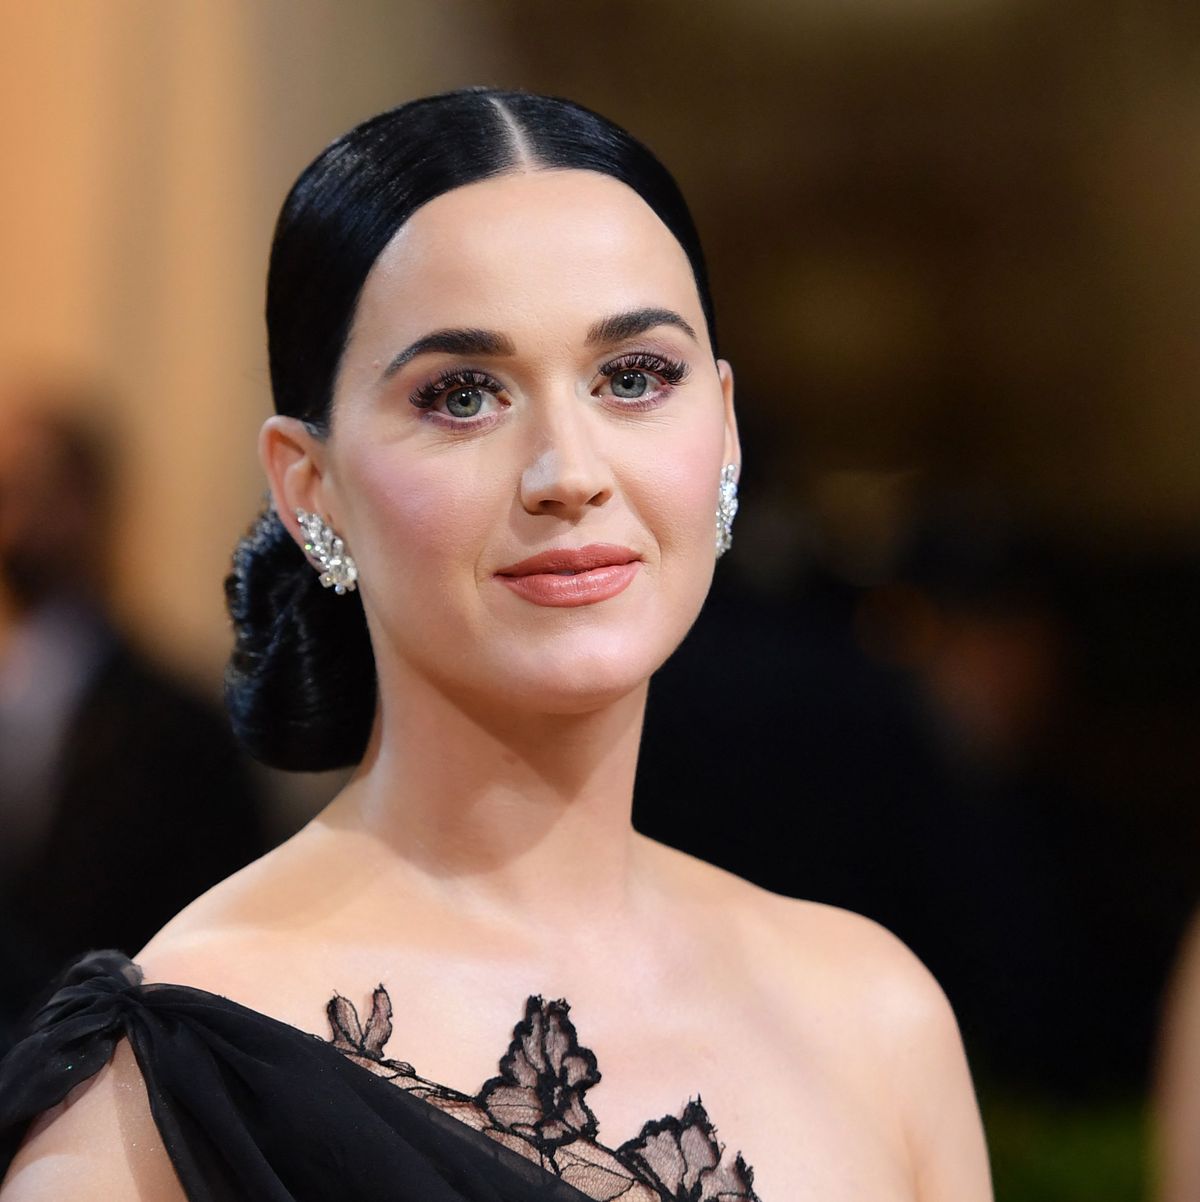 Katy Perry Blowjob Porn Captions - Katy Perry Talks About How She Regrets Passing On Working With Billie Eilish